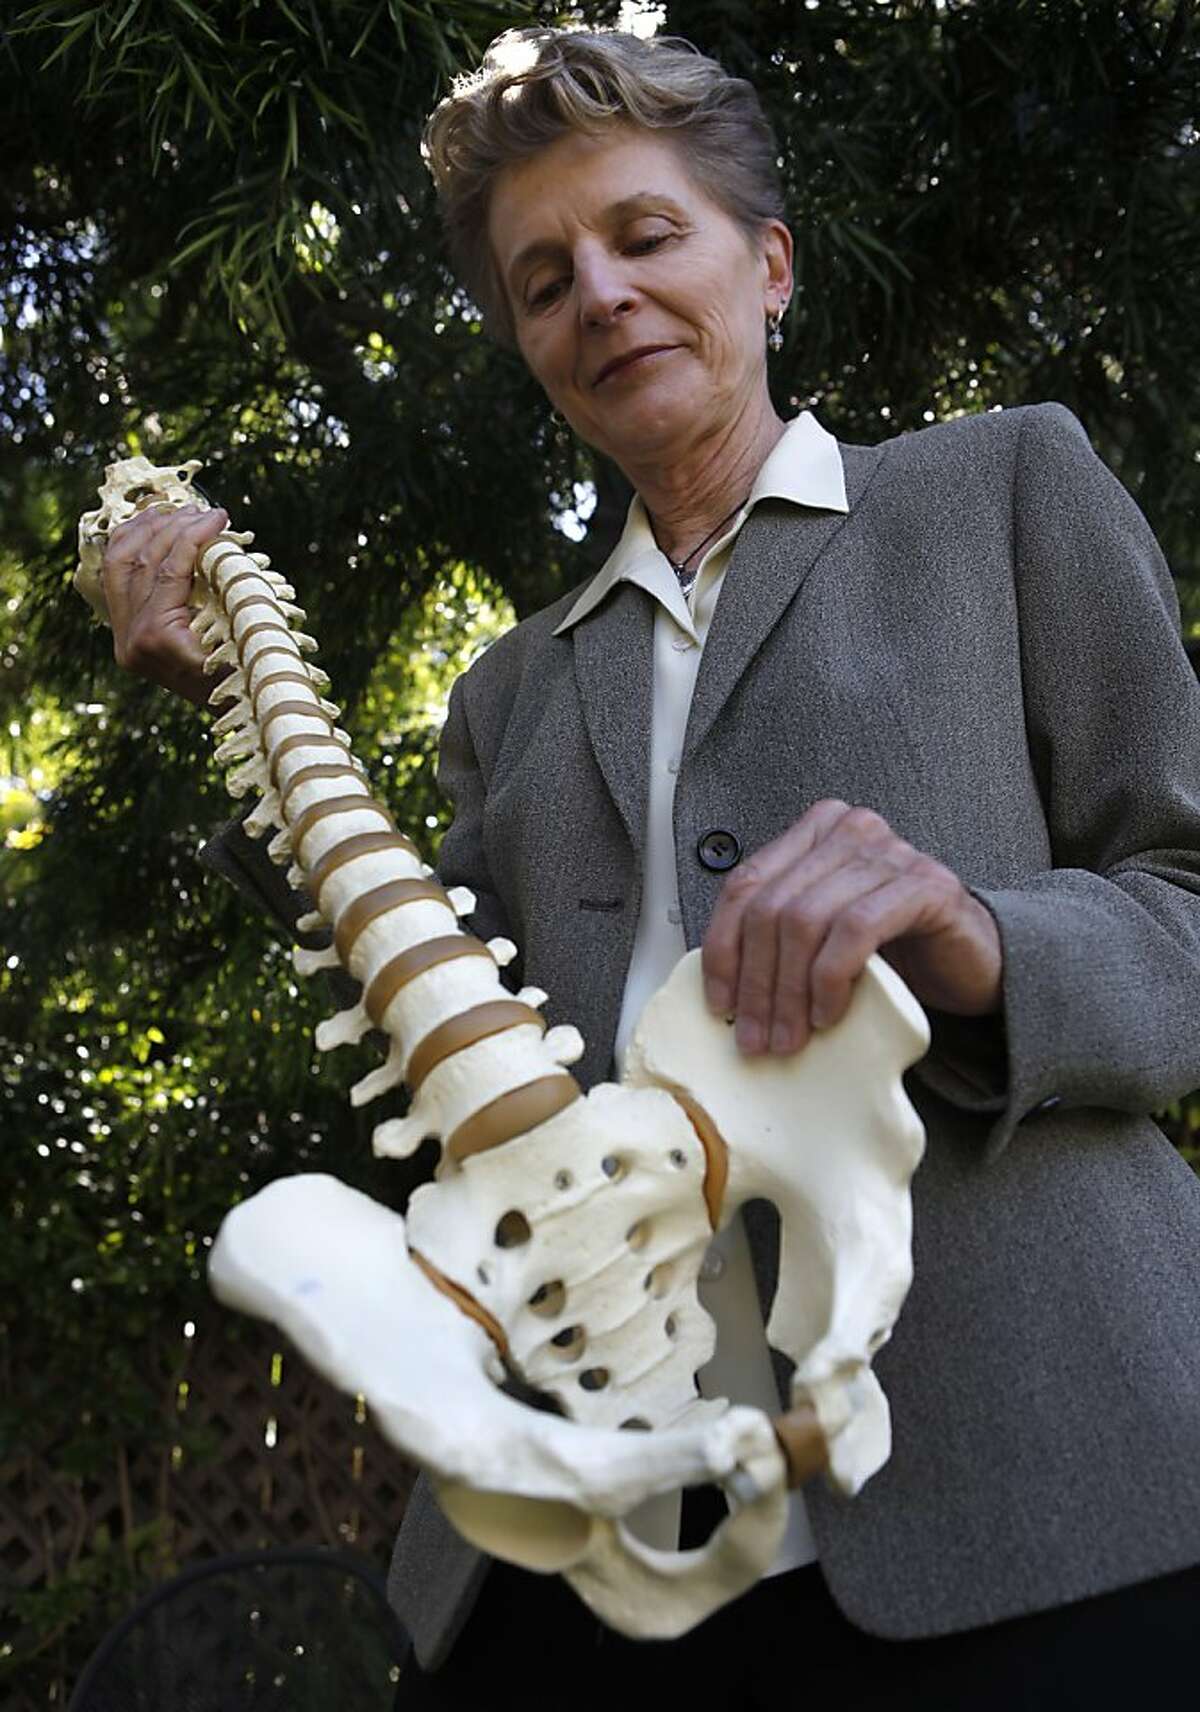 Chiropractor Lani Simpson examines a replica of a human spine and pelvic bone at her home in Berkeley, Calif. on Thursday, June 7, 2012. Simpson is a leading expert on osteoporosis, a condition which causes bones to become brittle and fragile.